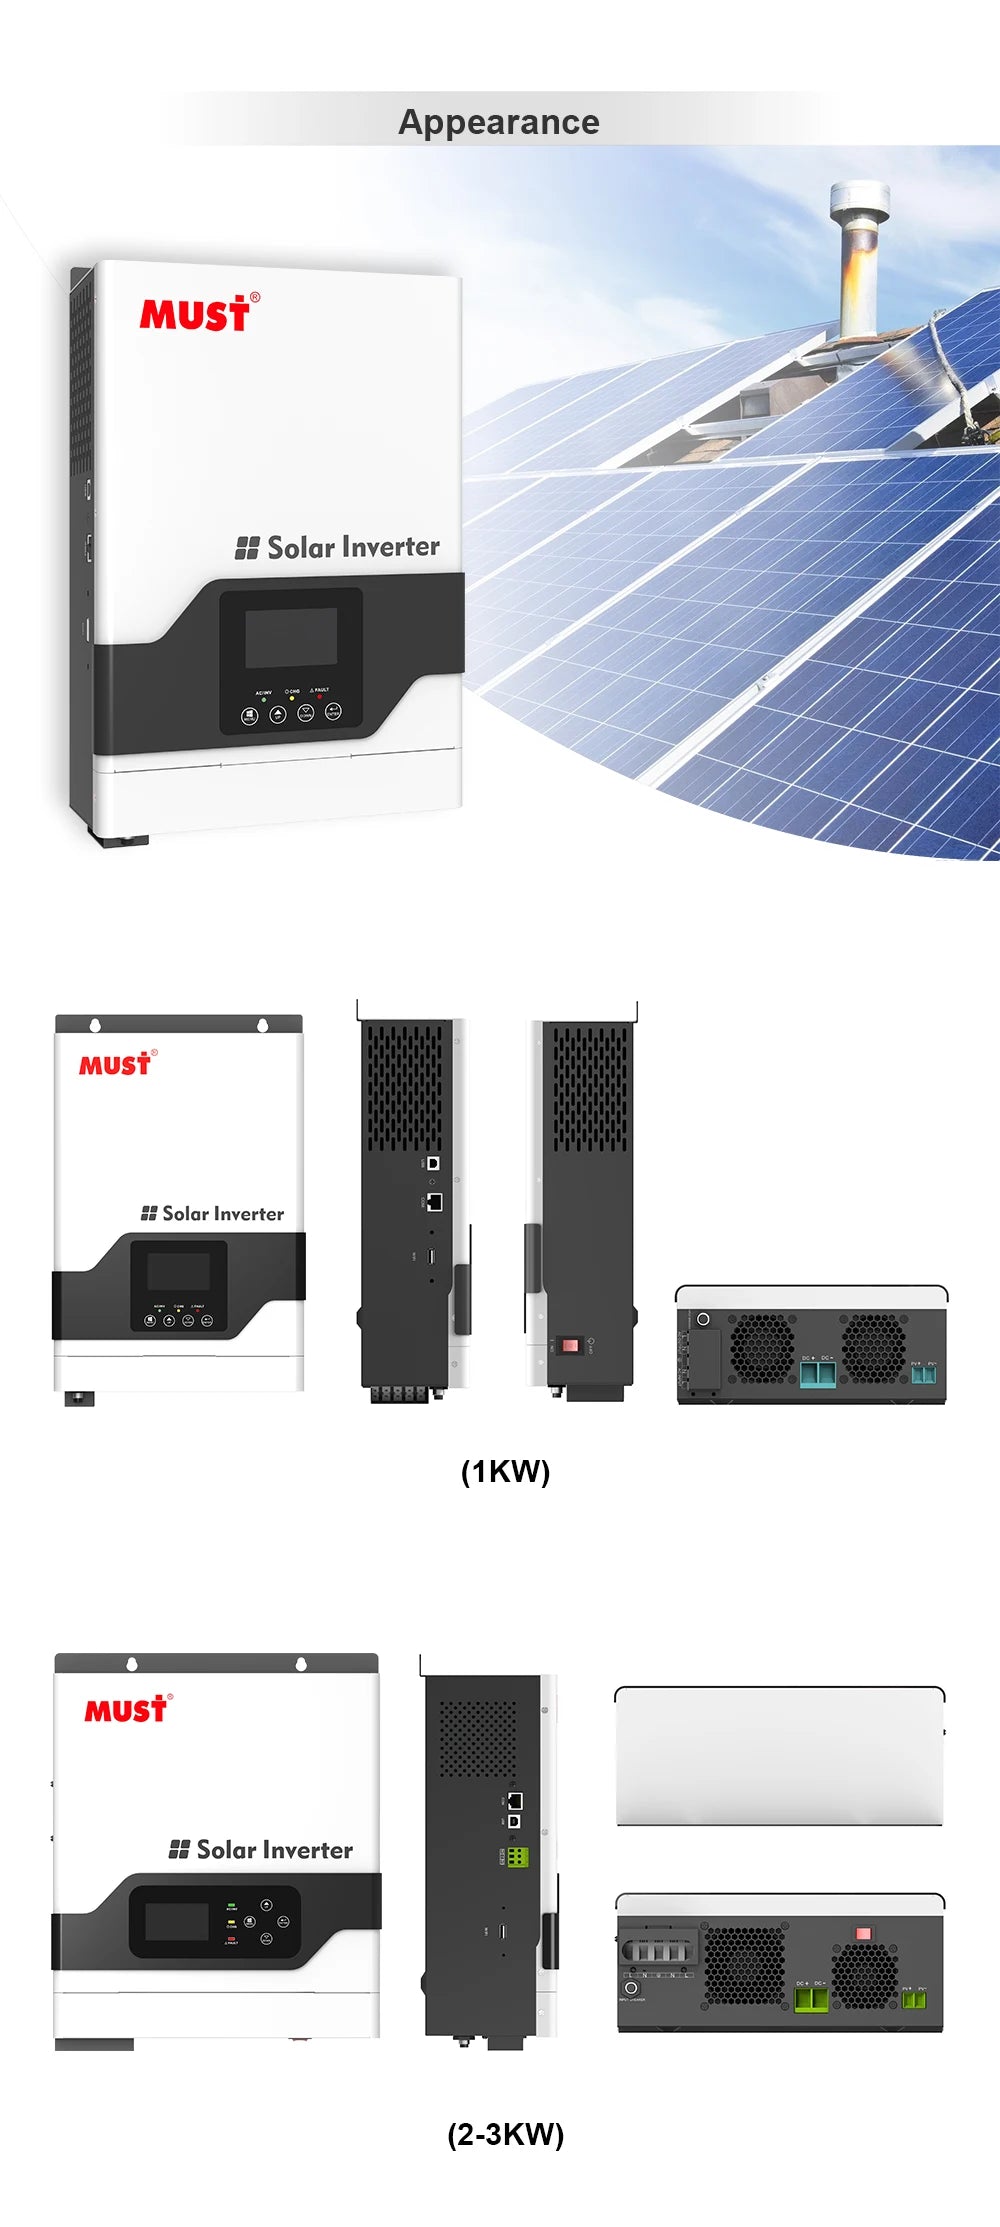 Off-grid solar inverter with WiFi, MPPT controller, and hybrid technology for efficient energy conversion.